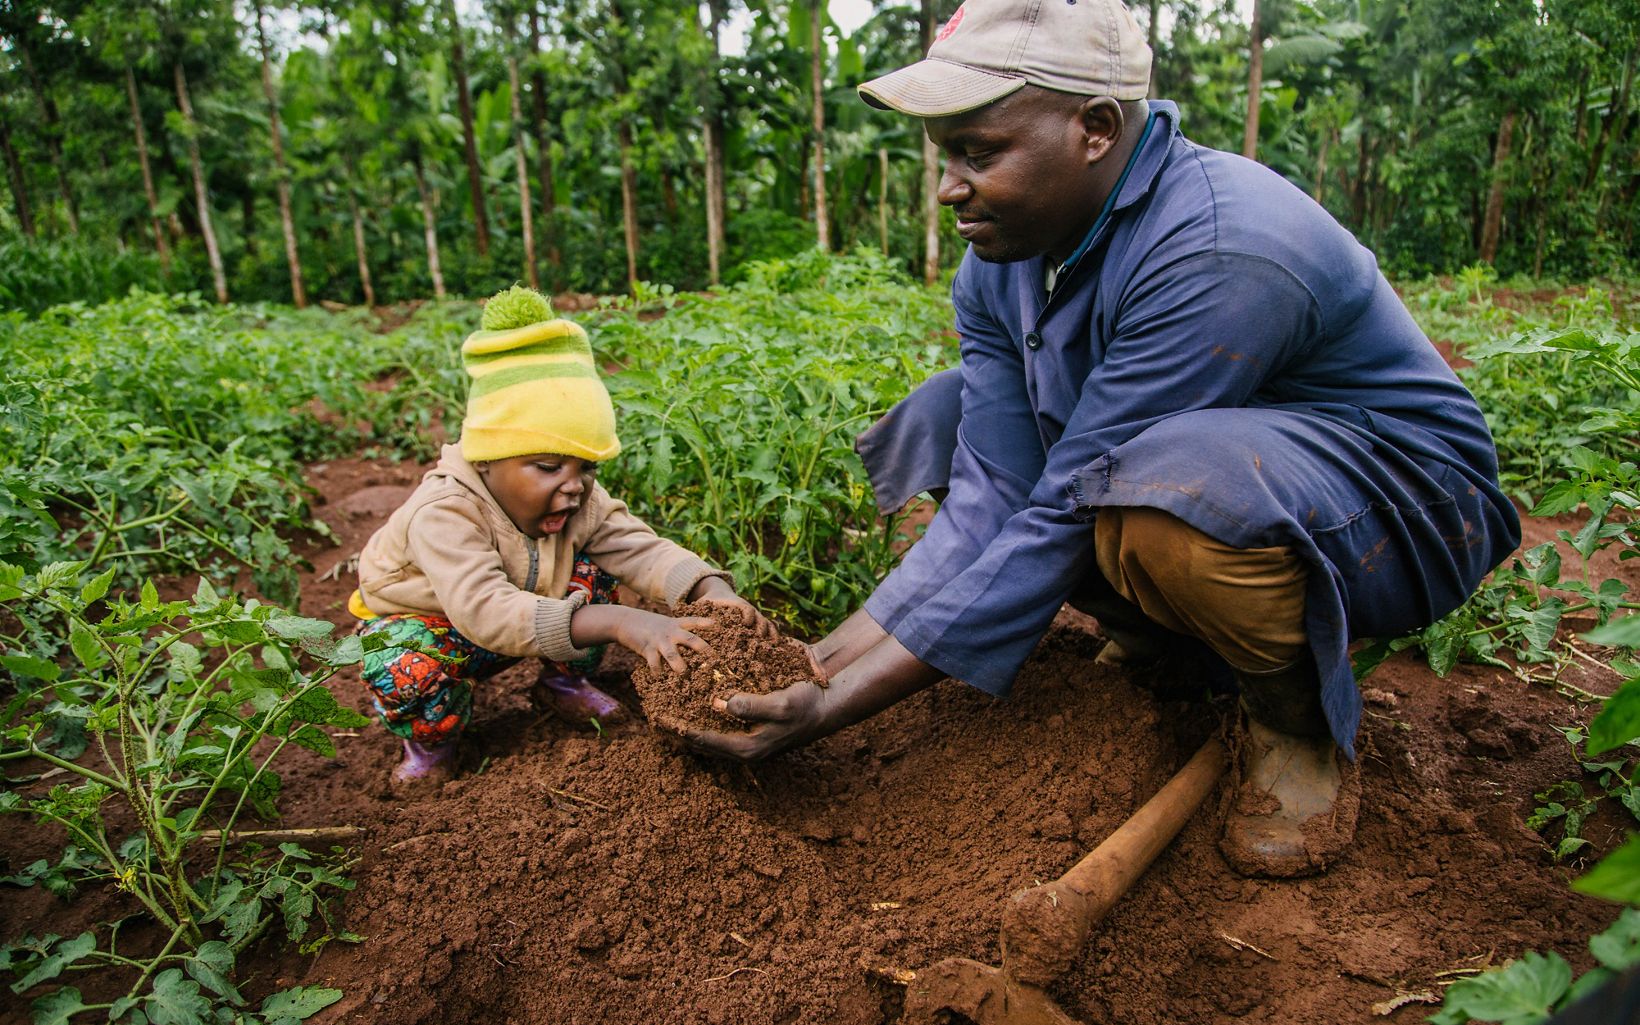 Man and child playing with dirt in a field of crops.